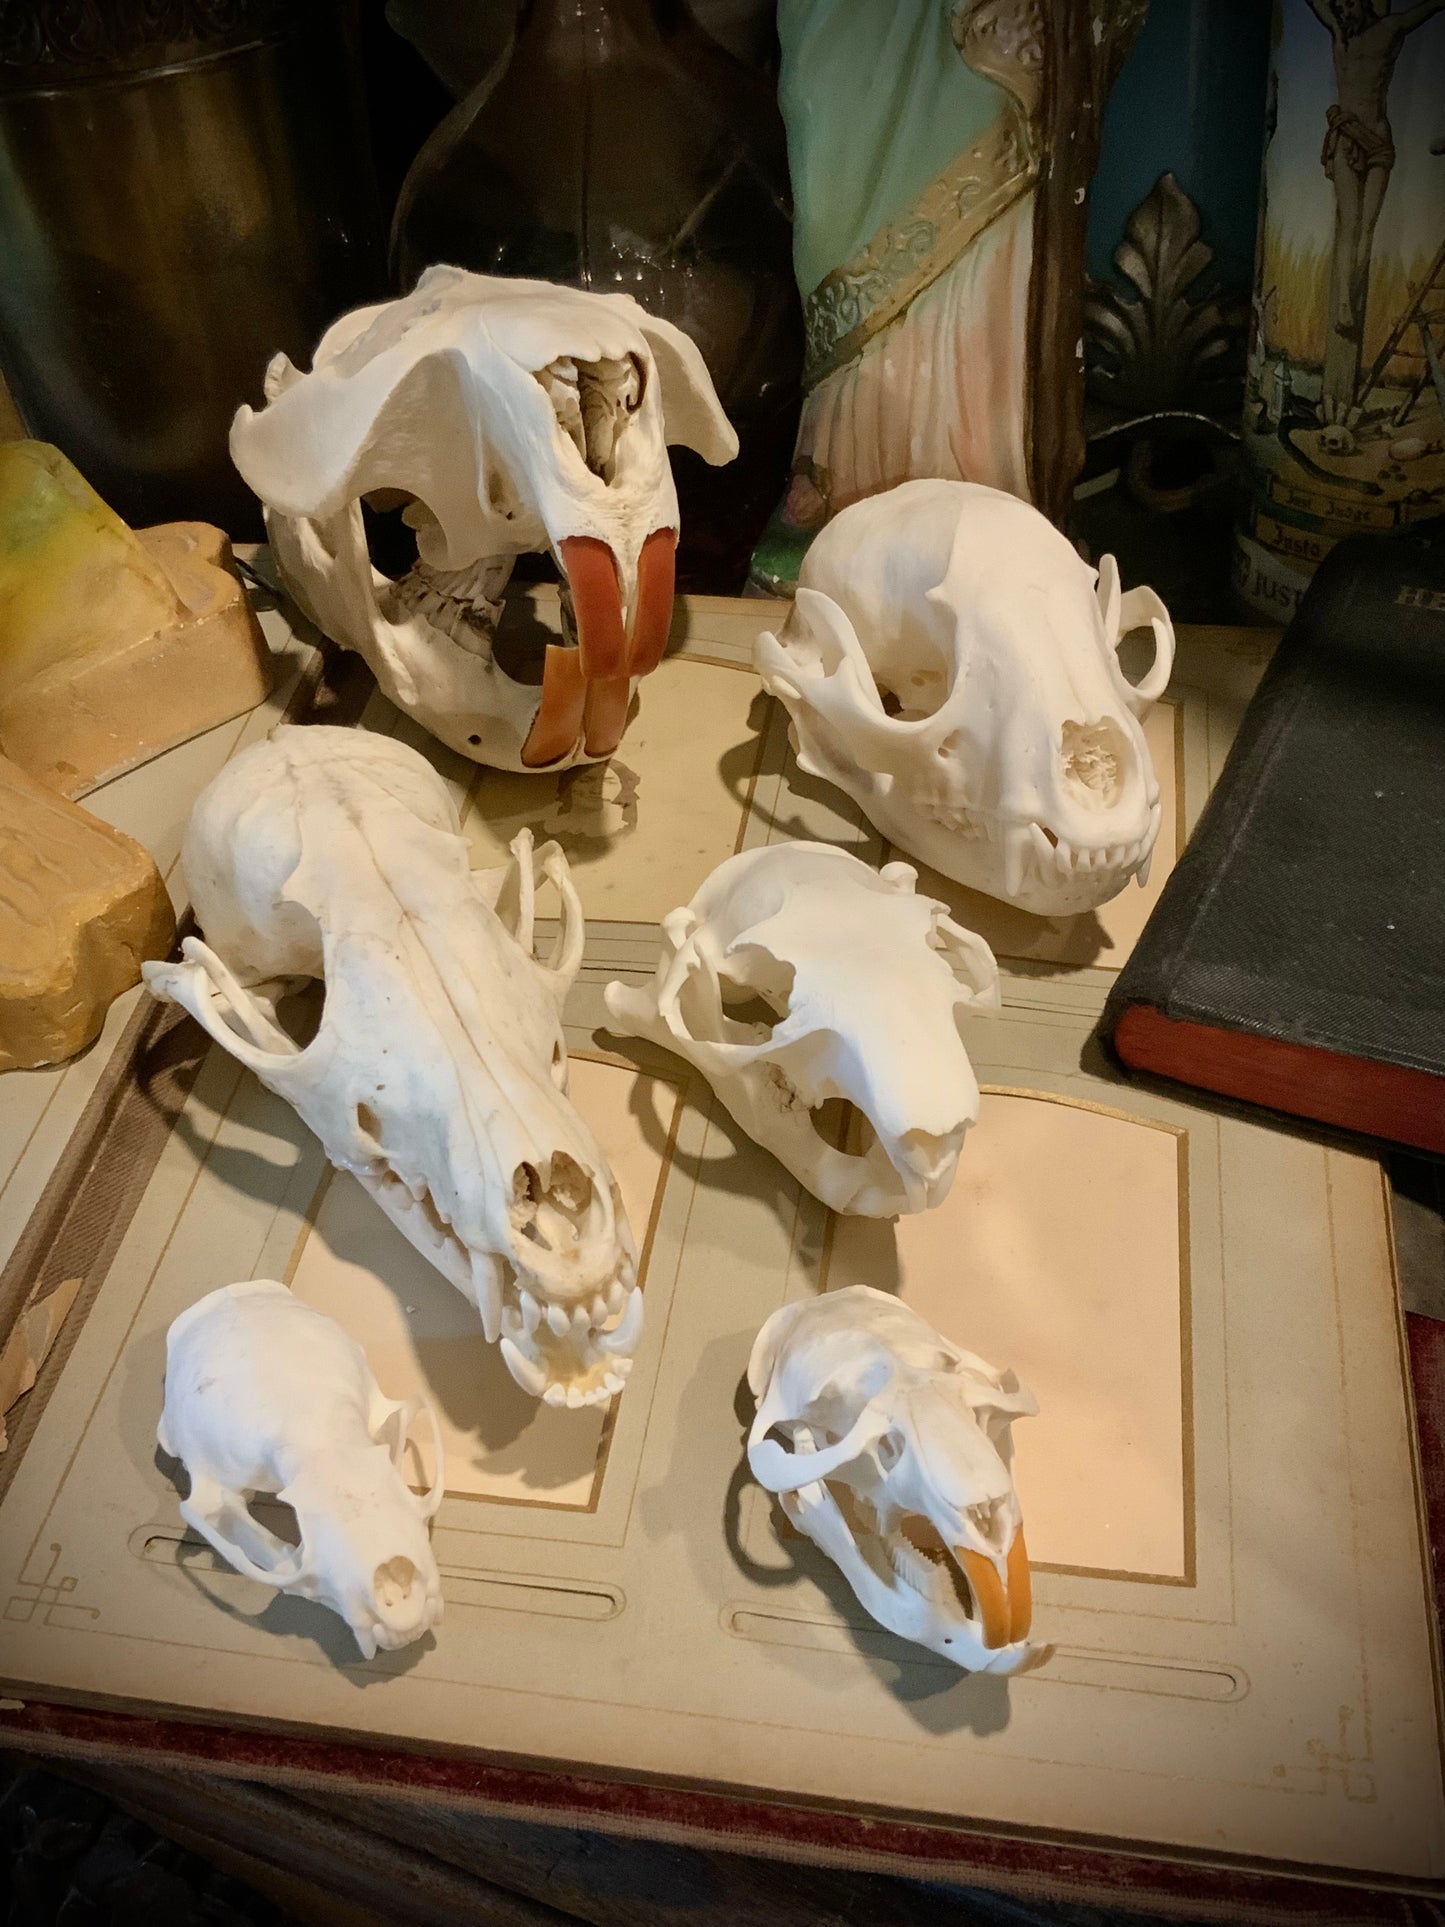 Skulls collections